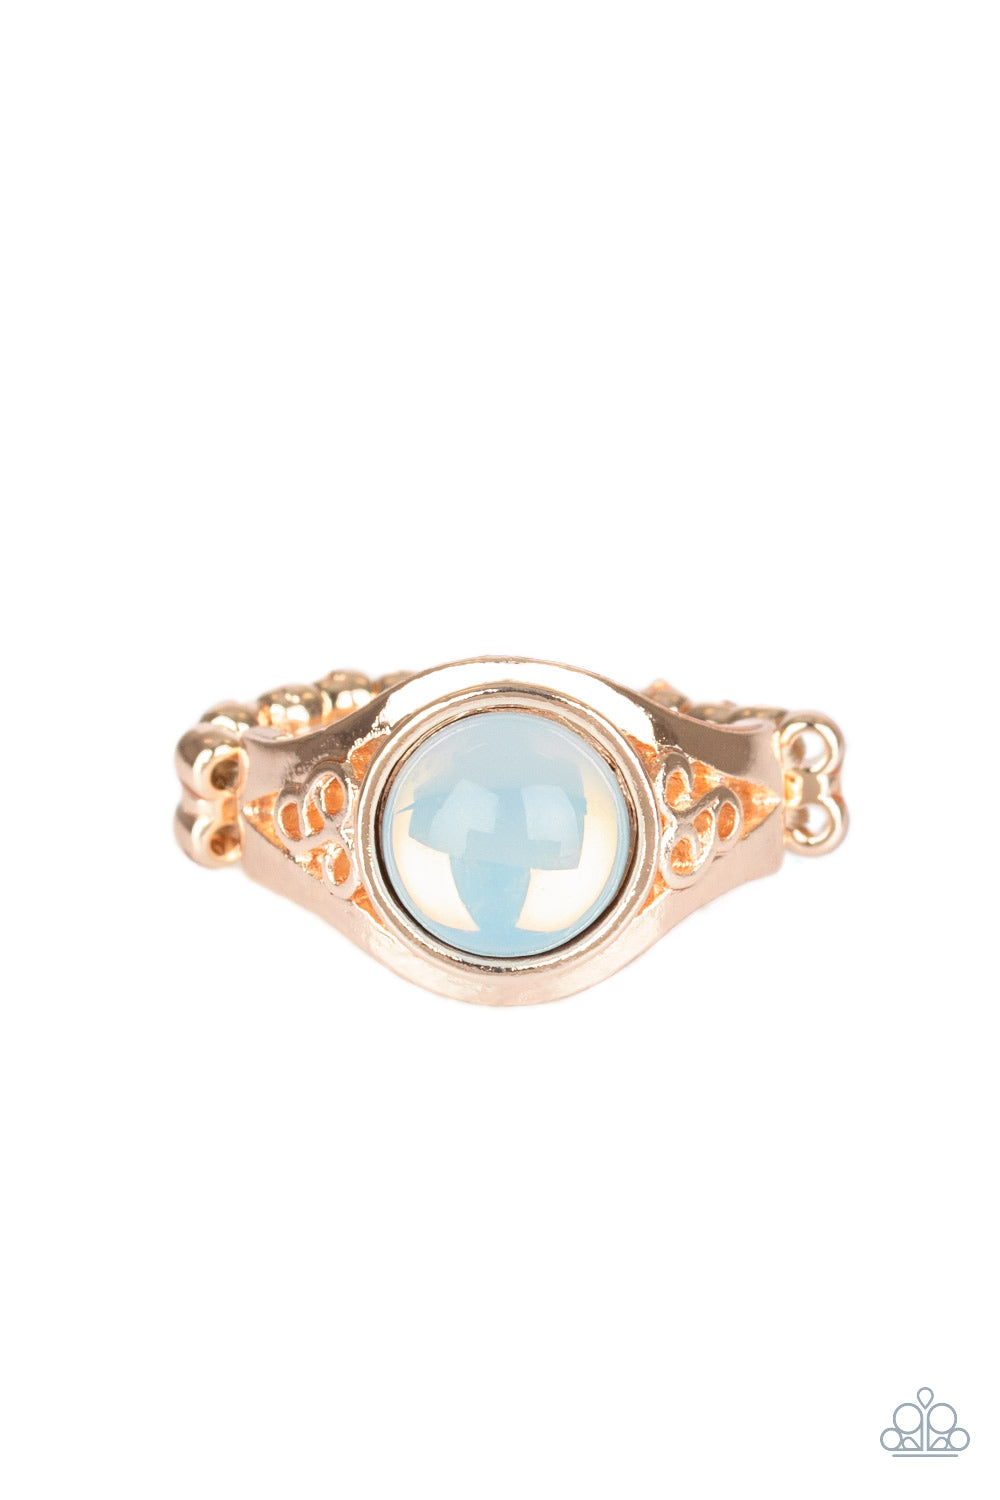 IT JUST GOES TO GLOW - ROSE GOLD OPALESCENT BEAD RING